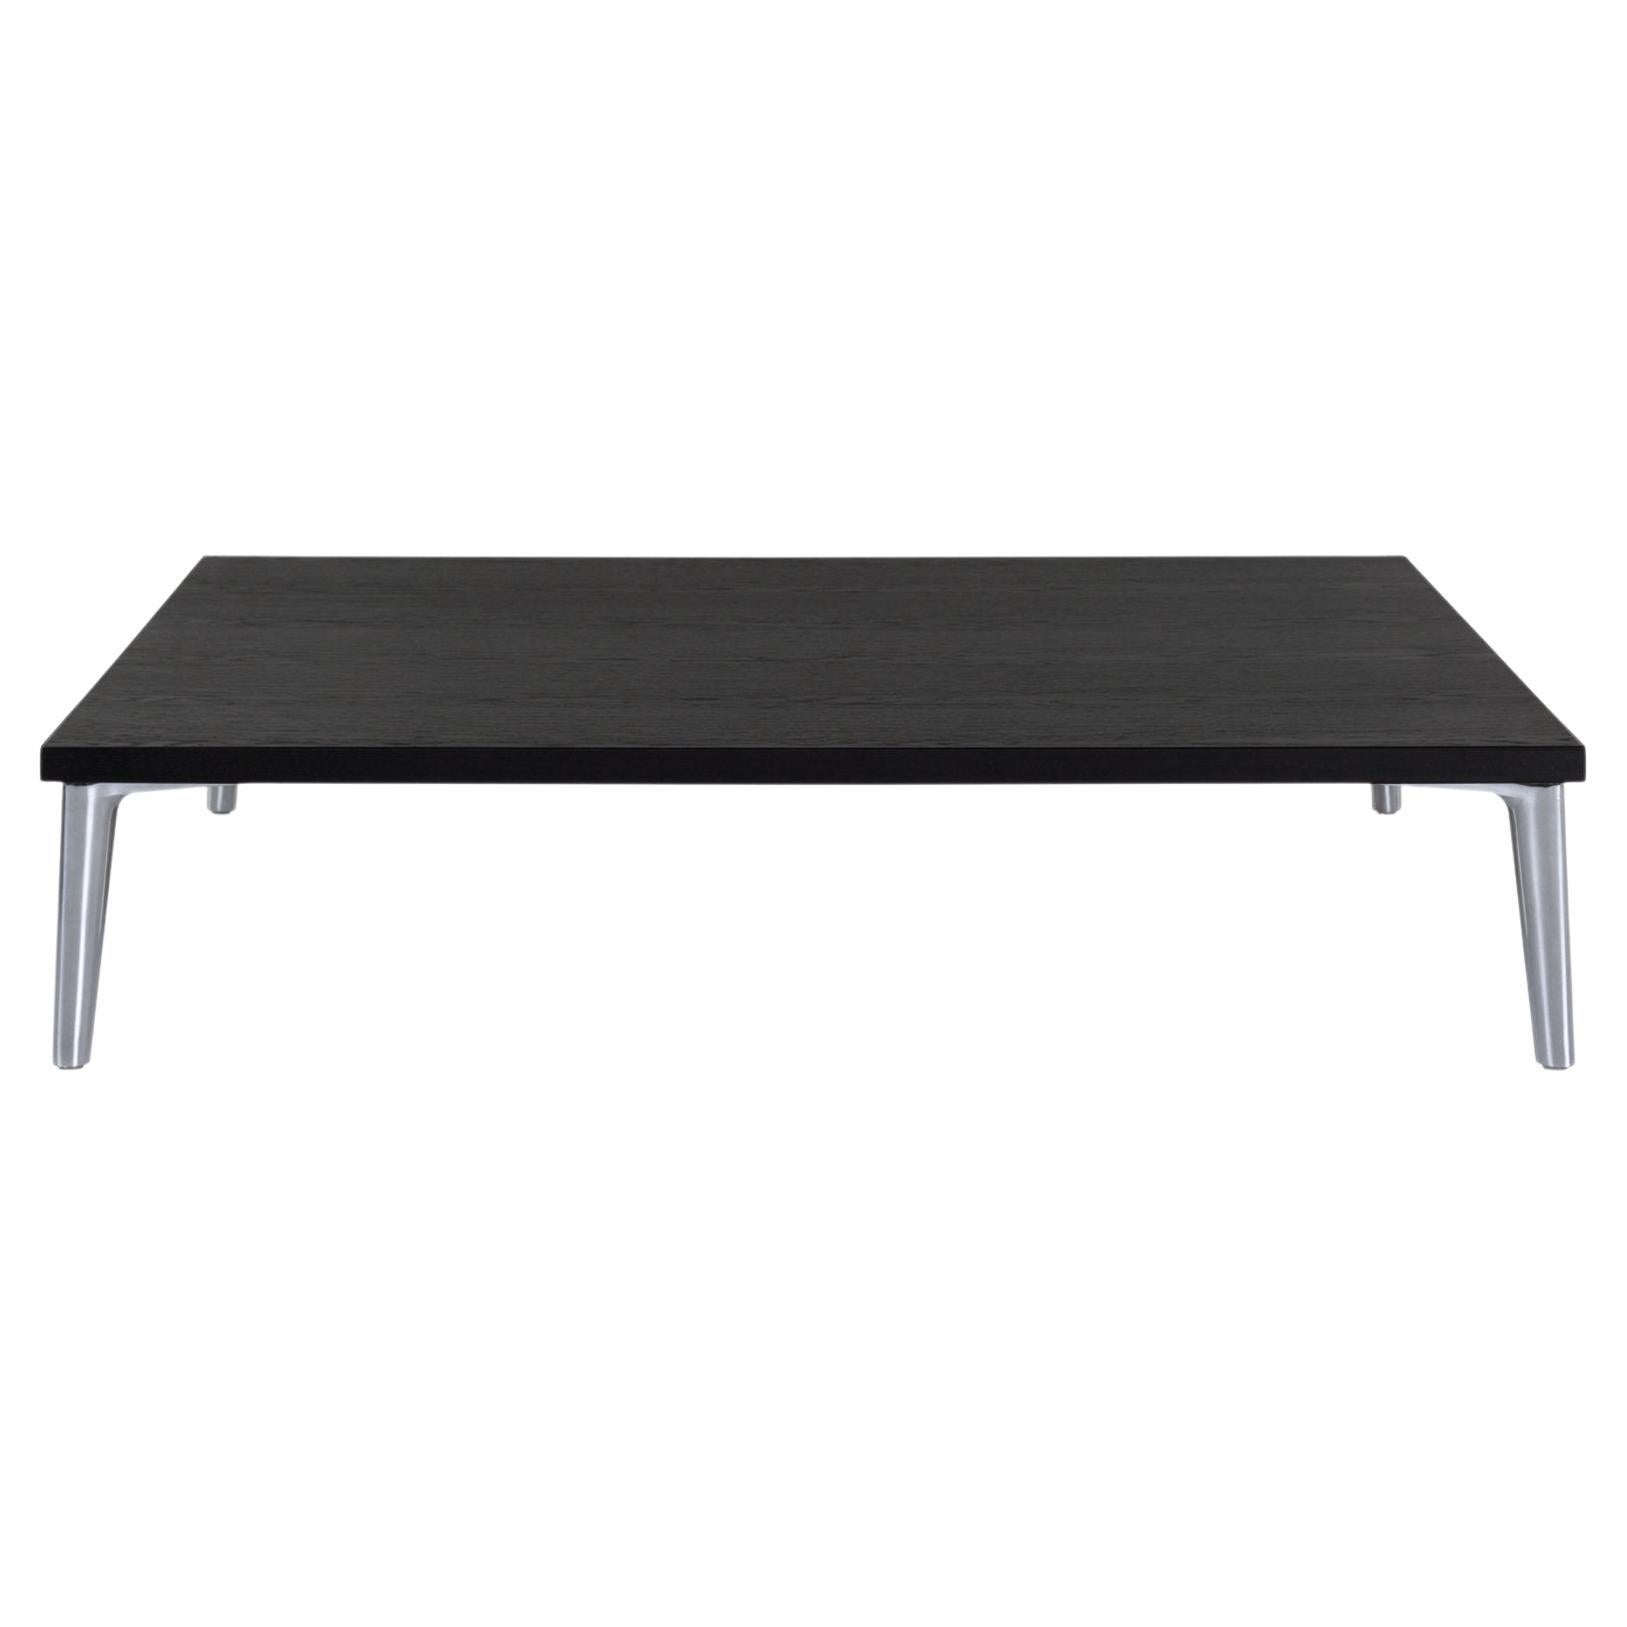 Moooi Sofa So Good Table Black Stained by by Marcel Wanders Studio For Sale